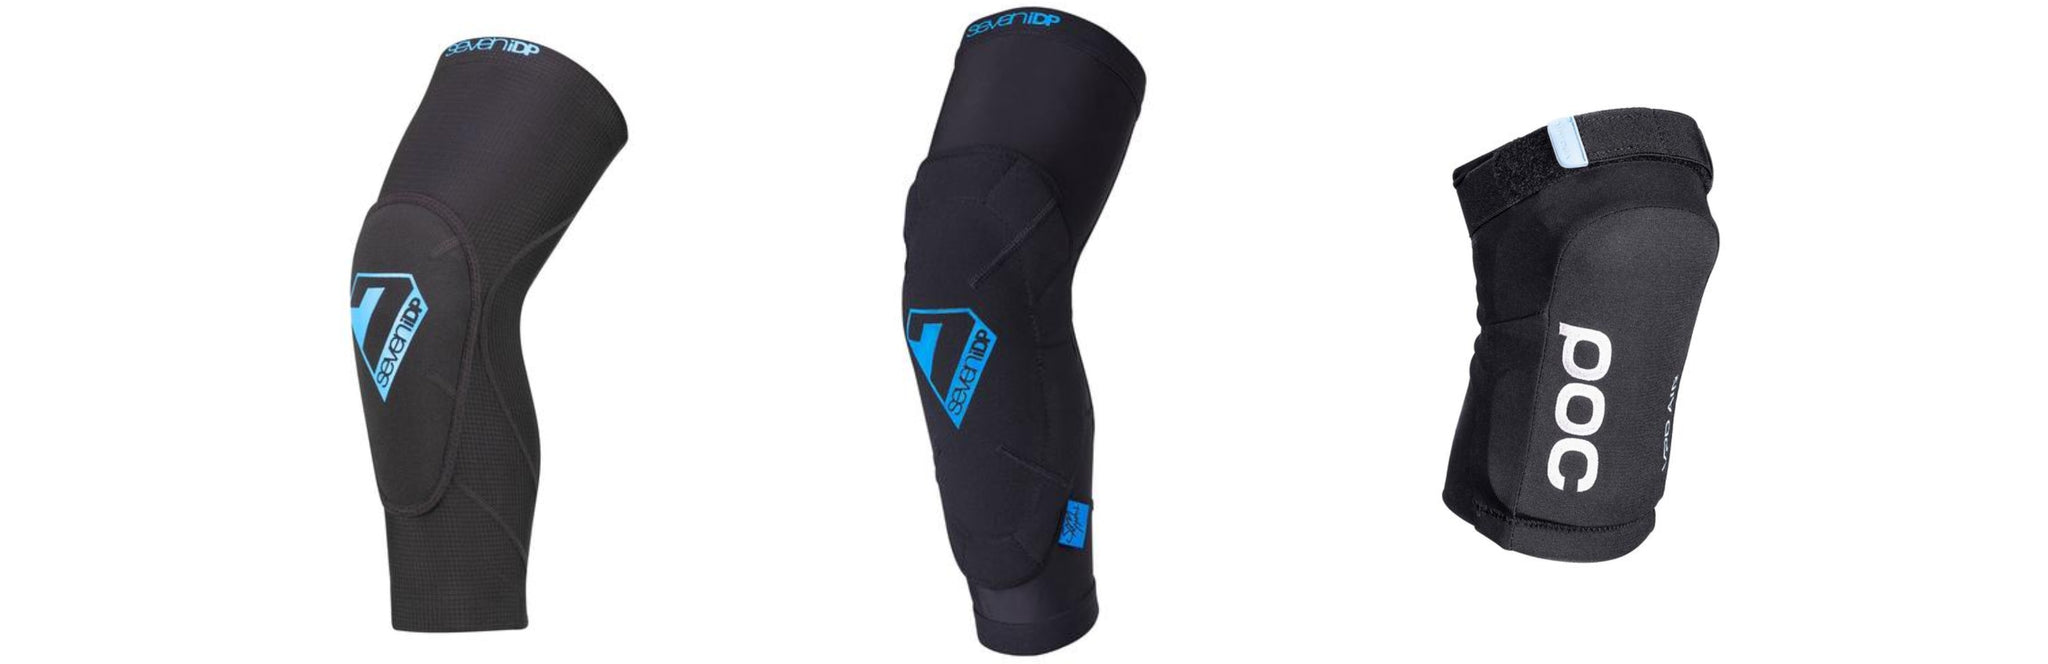 MTB Holiday gift guide knee pads